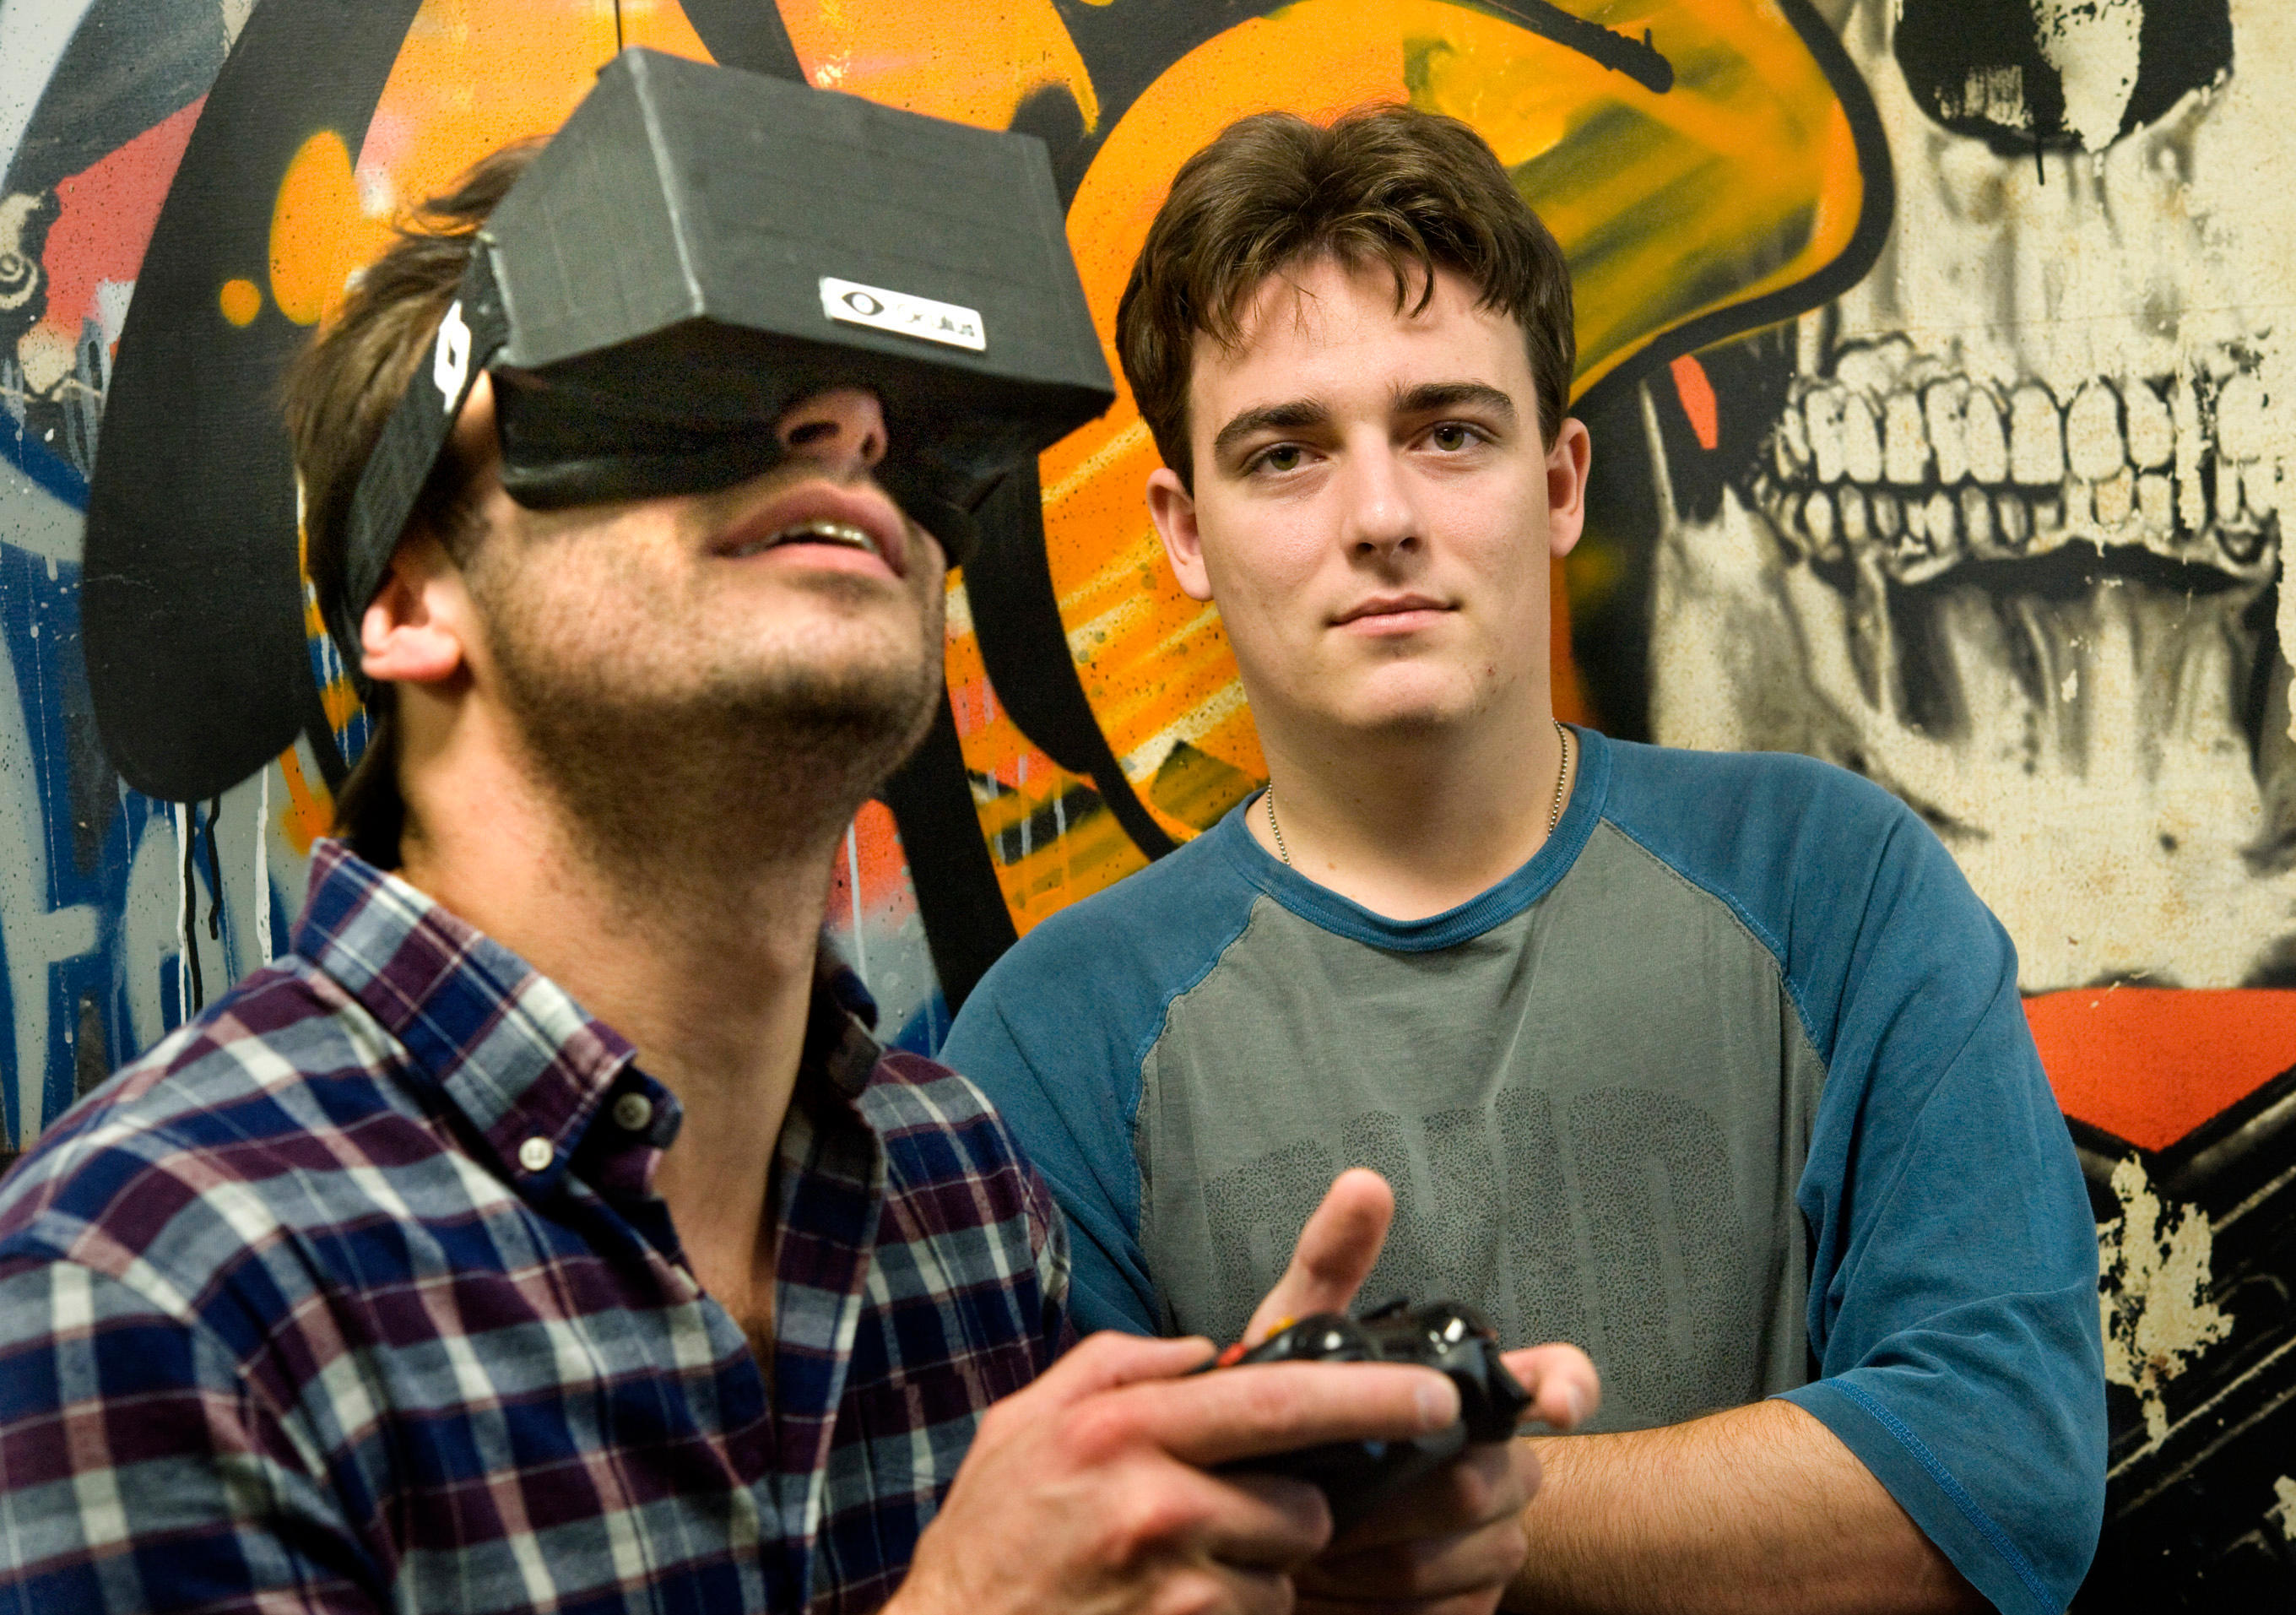 Nov. 14, 2011 - Irvine, California, U.S. - Oculus VR founder Palmer Luckey, 20, right, is the inventor of a virtual reality gami